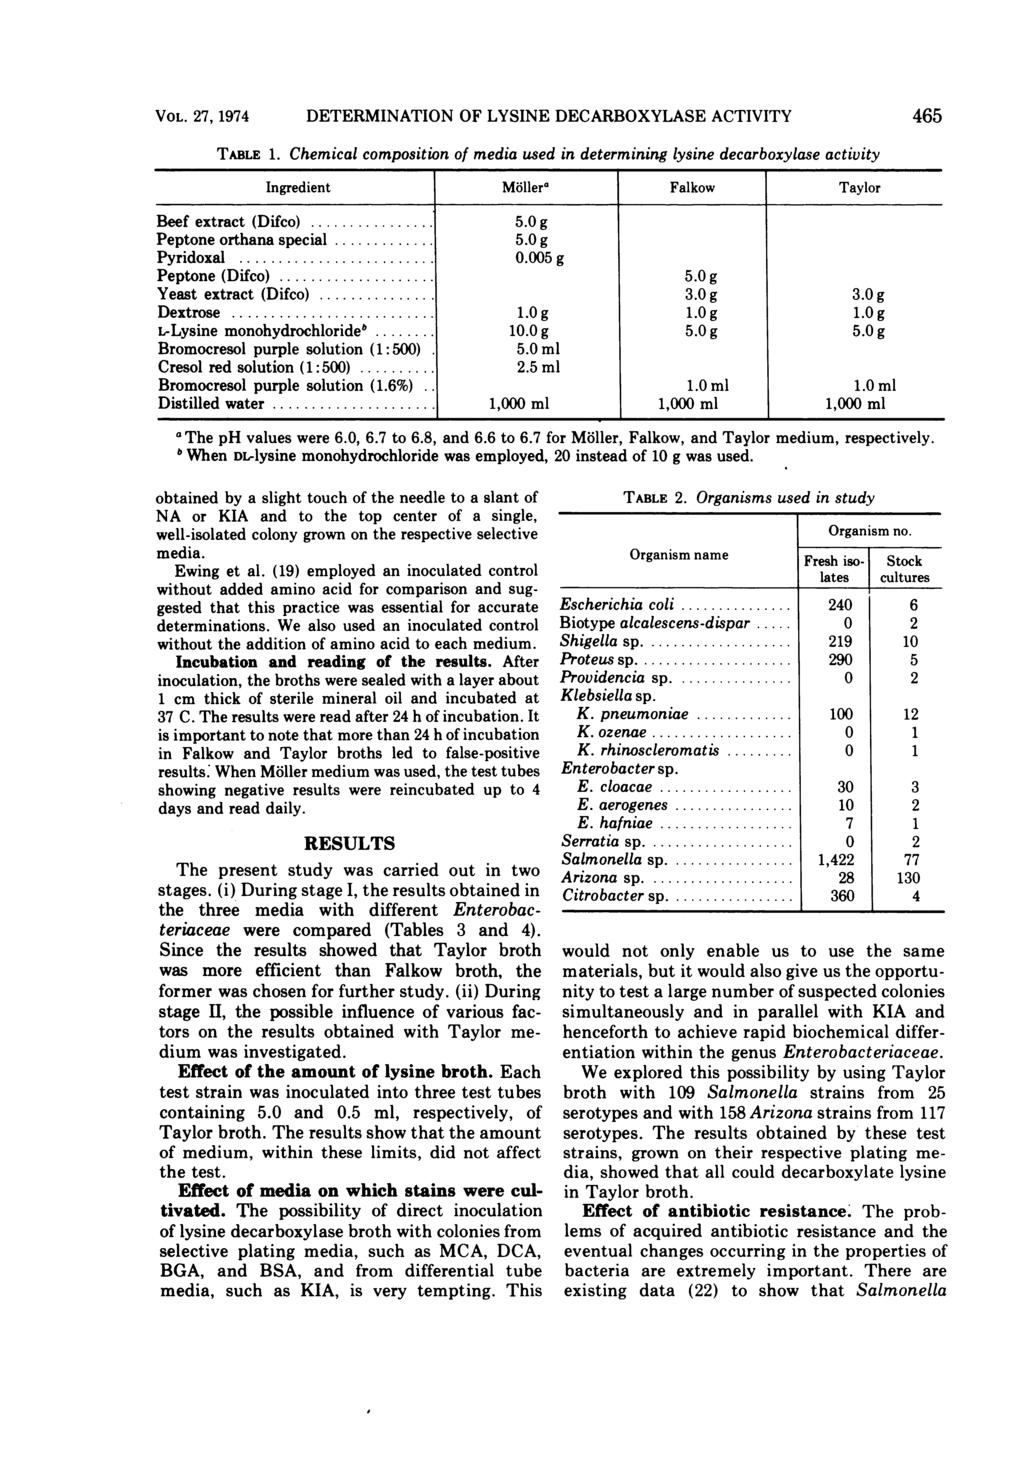 VOL. 27, 1974 DETERMINATION OF LYSINE DECARBOXYLASE ACTIVITY 465 TABLE 1.